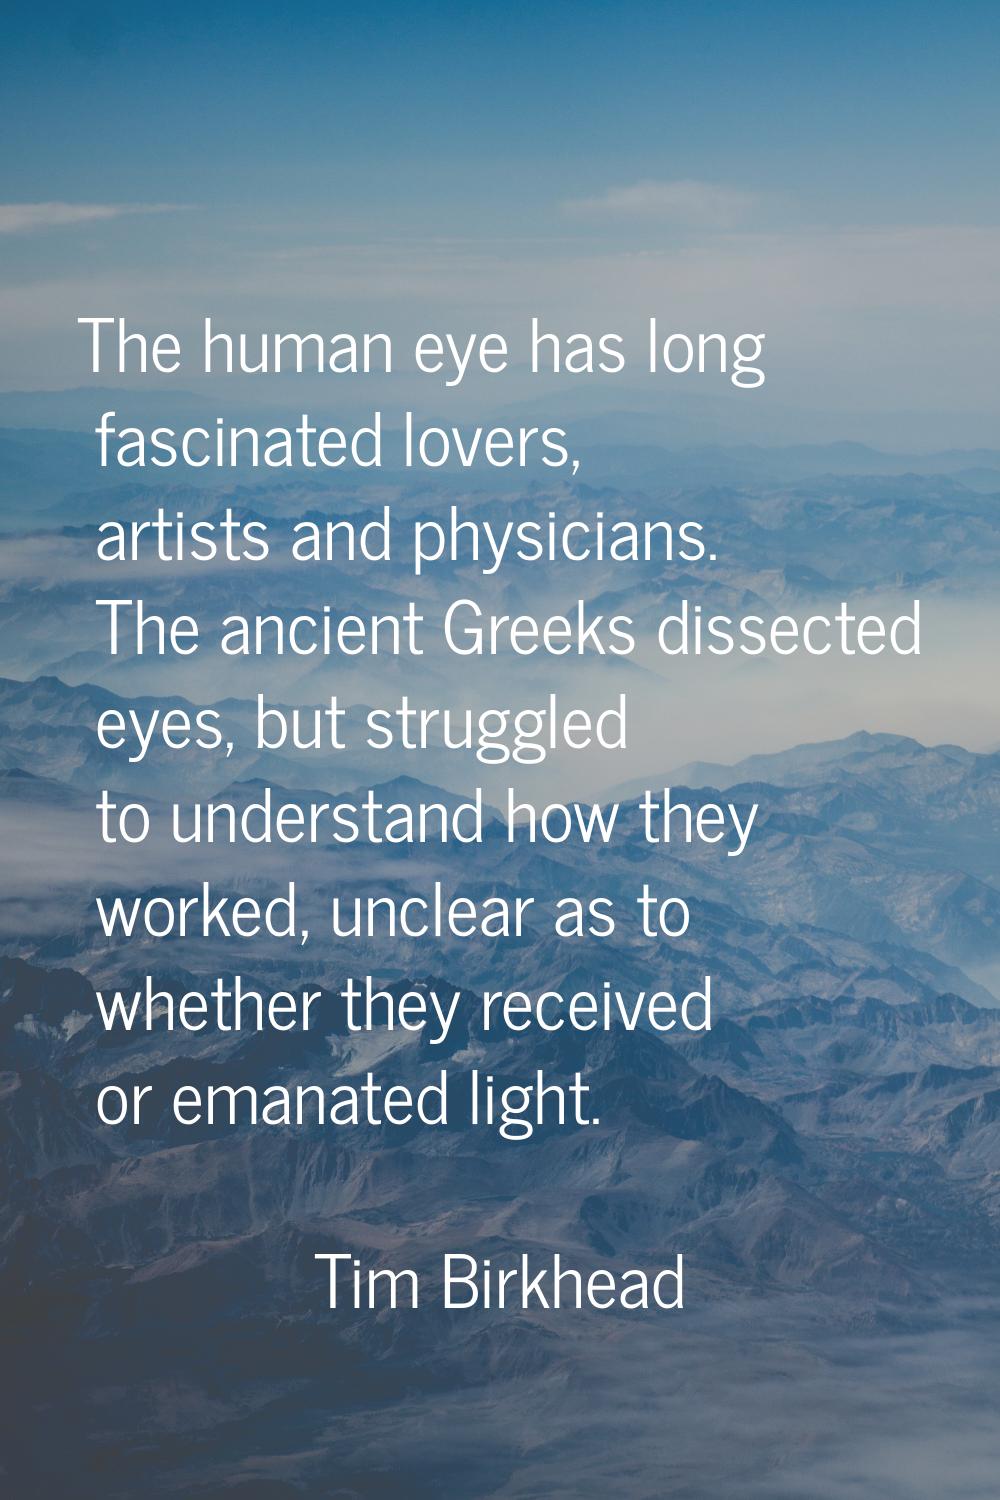 The human eye has long fascinated lovers, artists and physicians. The ancient Greeks dissected eyes